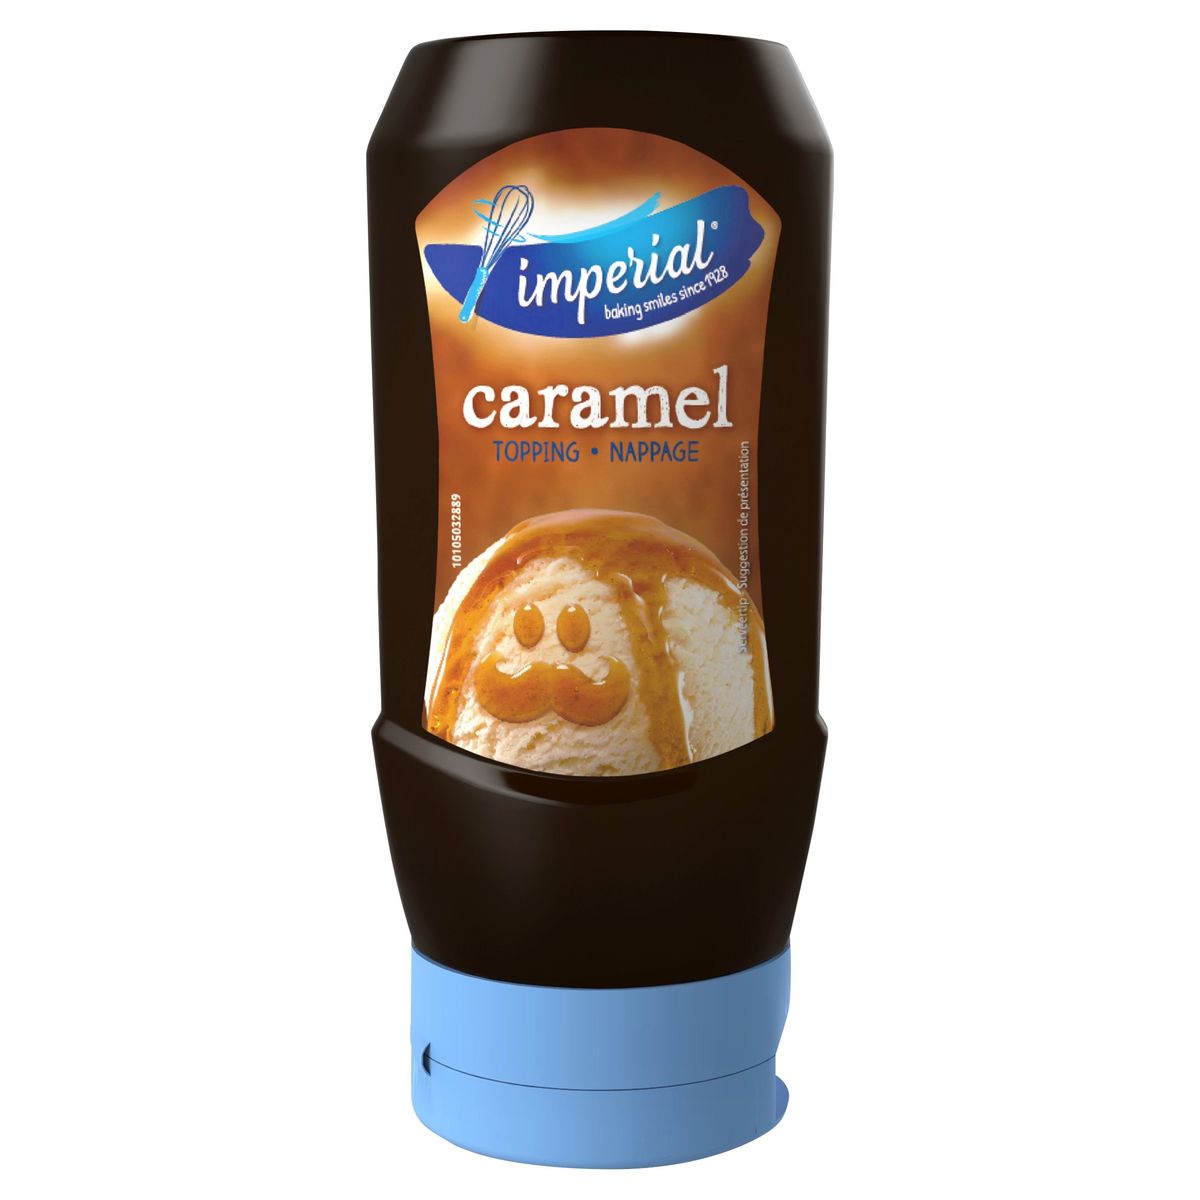 Imperial Caramel Topping Nappage 290 ml